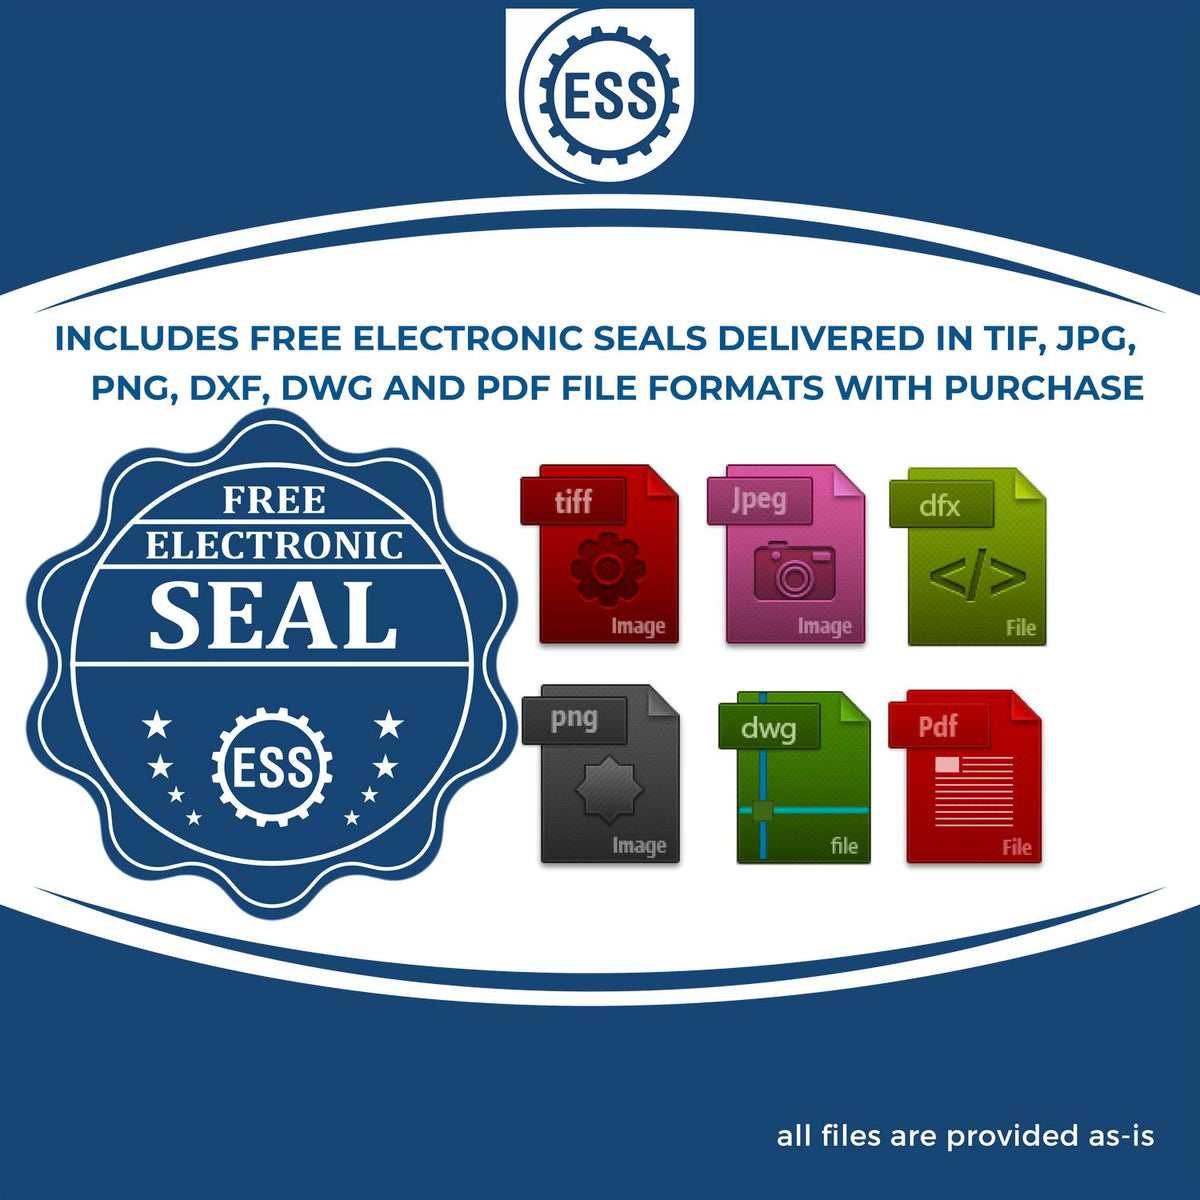 An infographic for the free electronic seal for the Handheld Alaska Land Surveyor Seal illustrating the different file type icons such as DXF, DWG, TIF, JPG and PNG.